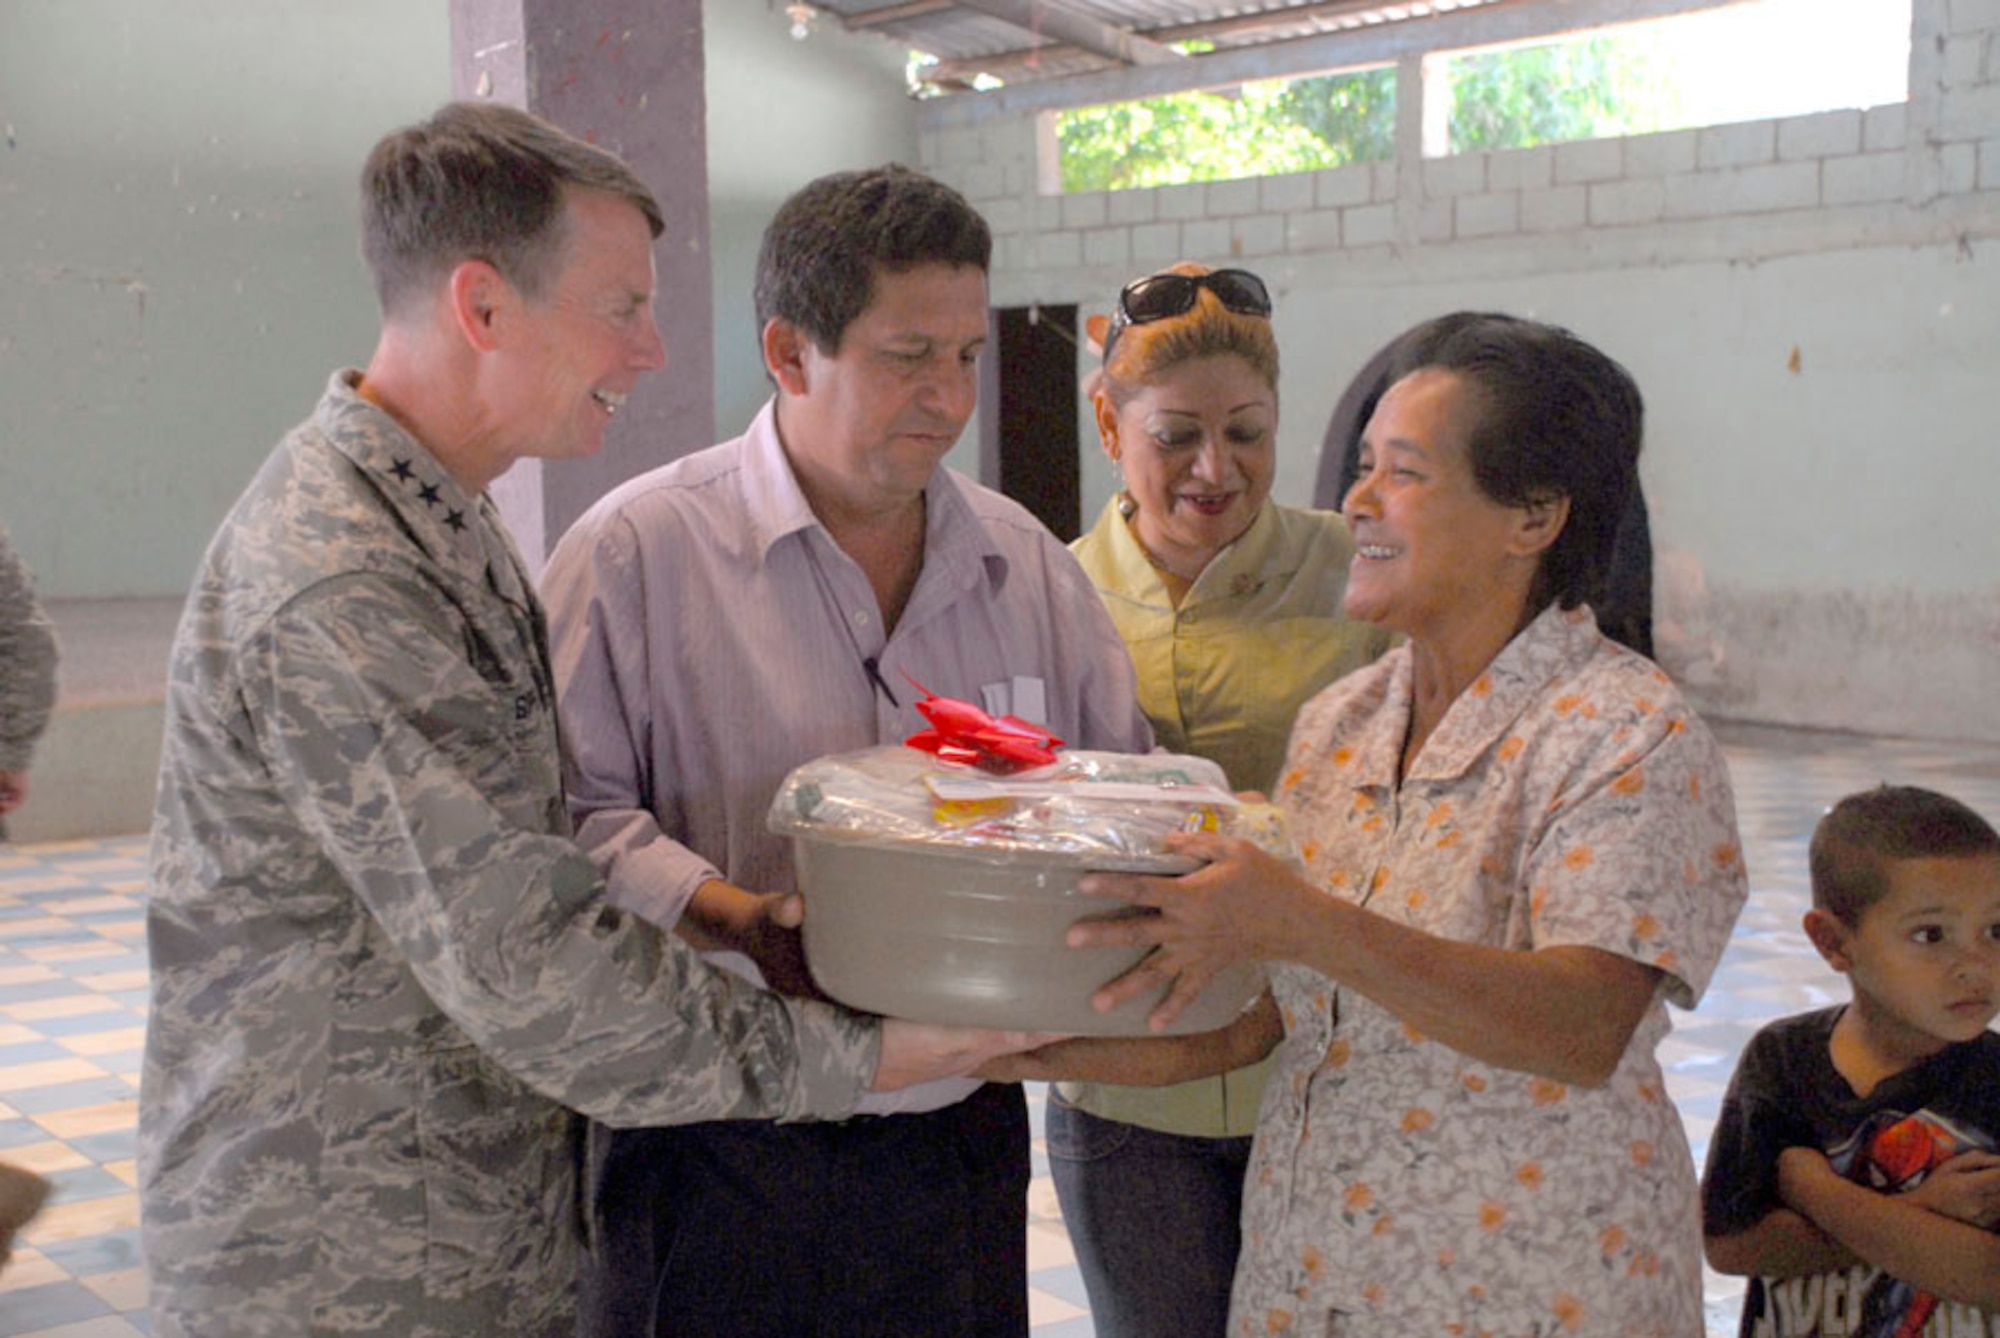 AJUTERIQUE, Honduras - Air Force Lt. Gen. Glenn Spears, U.S. Southern Command deputy commander, hands a local woman a free gift basket Dec. 9 here. The baskets, which contained essential food and supplies, were given to more than 100 local families who were recently affected by widespread flooding in Honduras. (U.S. Air Force photo by Staff Sgt. Joel Mease) 